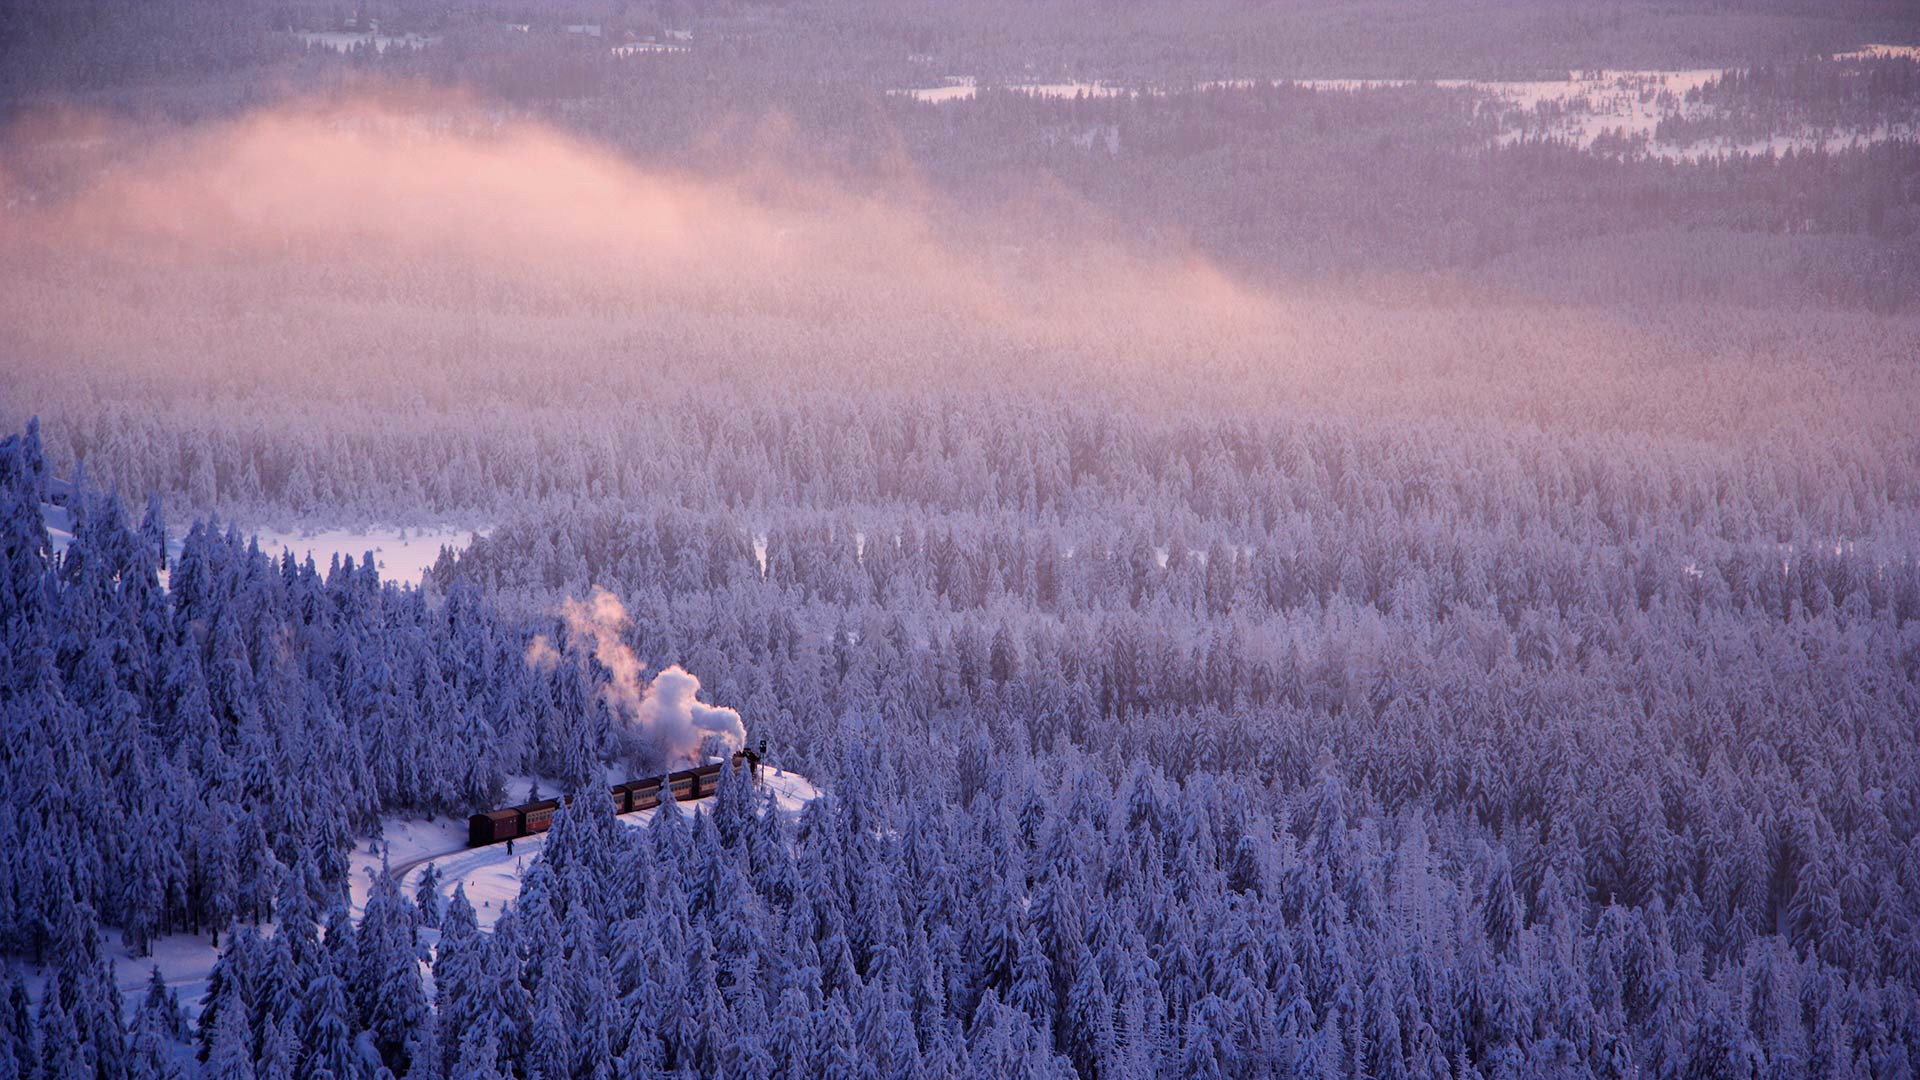 General 1920x1080 landscape snow train Saxony Germany pine trees forest nature winter mist smoke trees cold railway